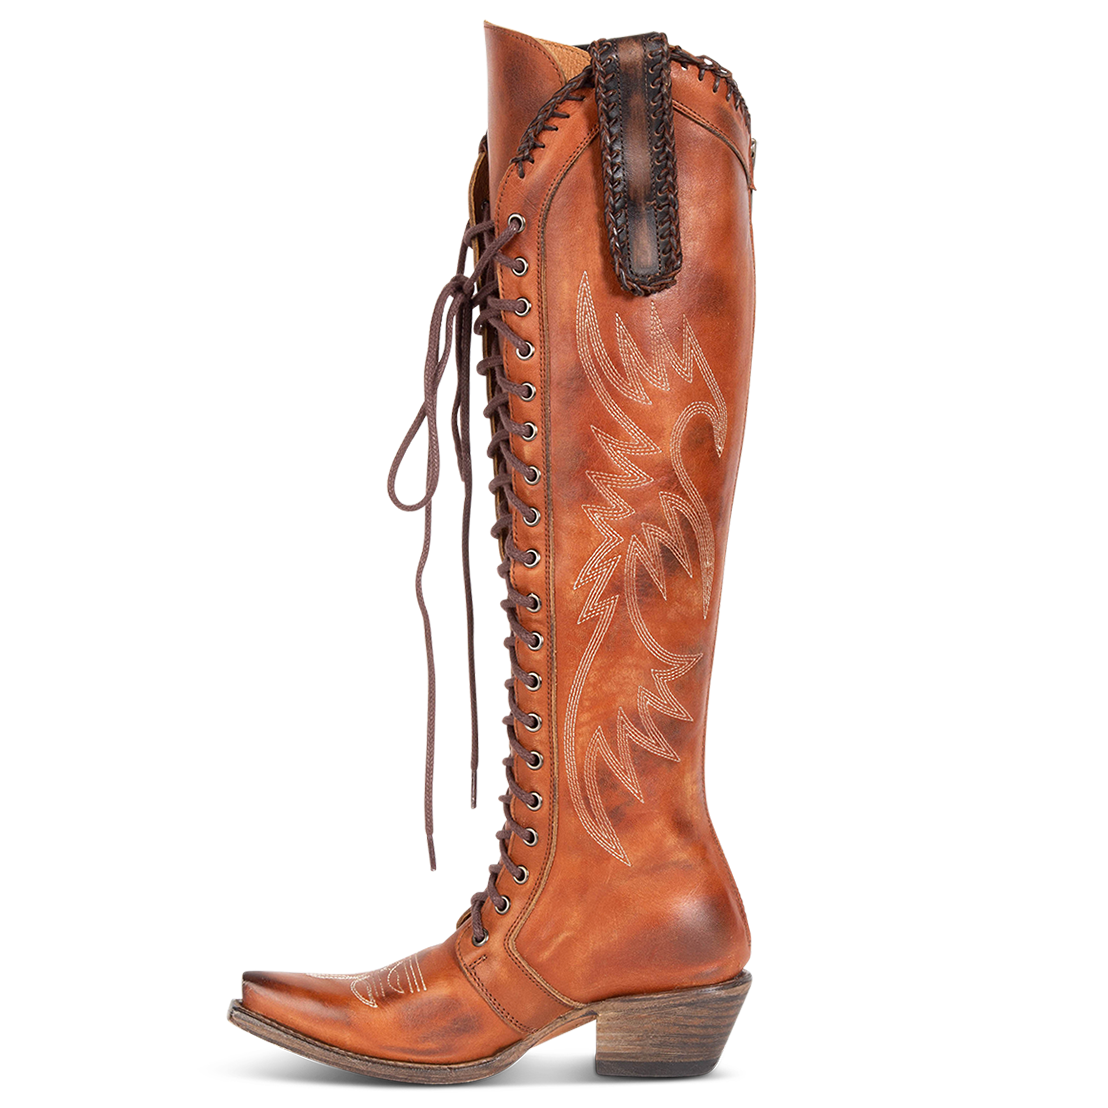 Inside view showing tall lace up shaft, woven leather accents, and contrasting stitch detailing on FREEBIRD women's Wilder whiskey boot